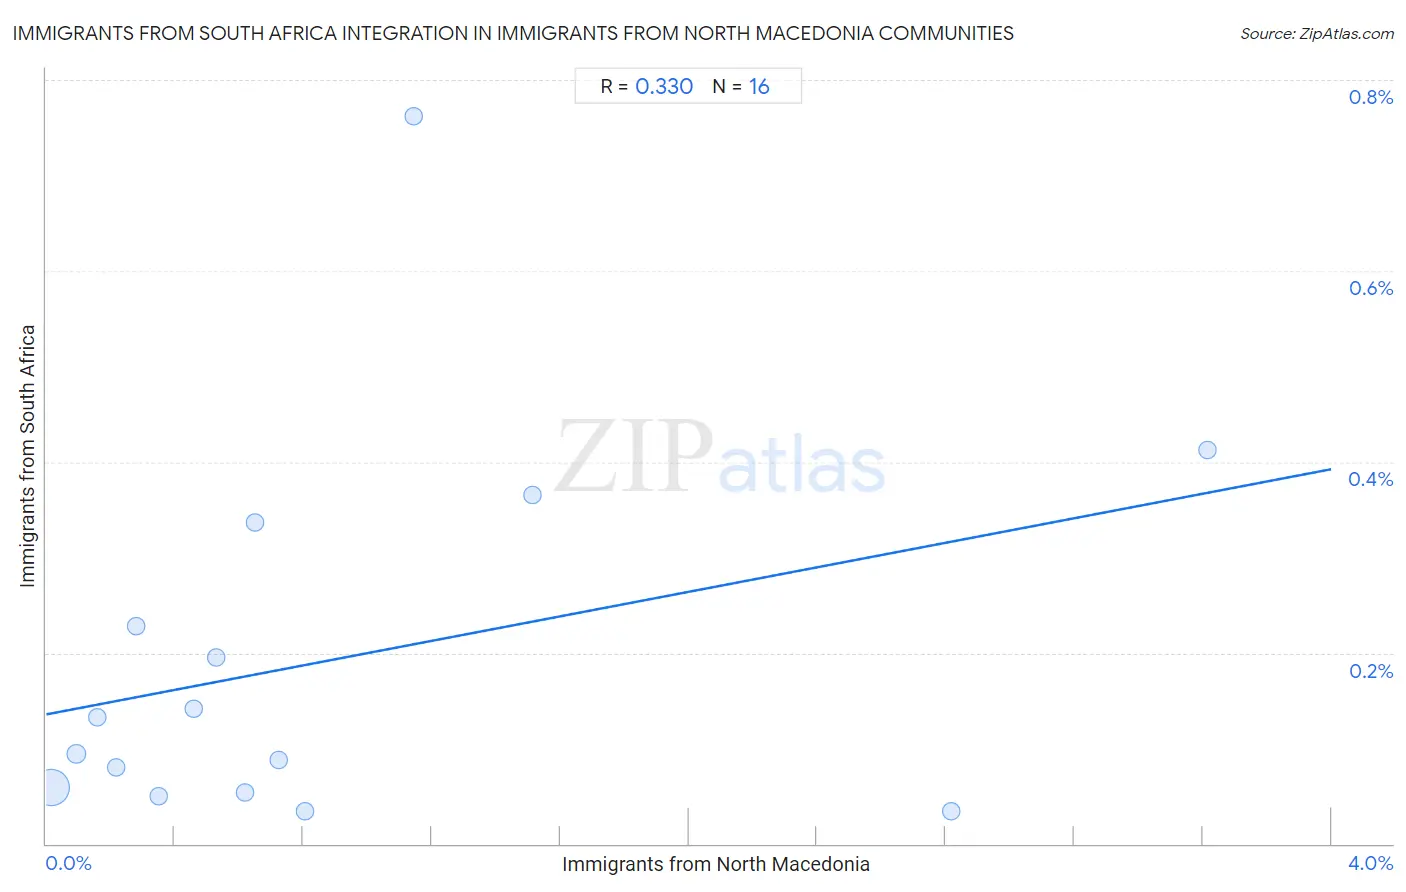 Immigrants from North Macedonia Integration in Immigrants from South Africa Communities